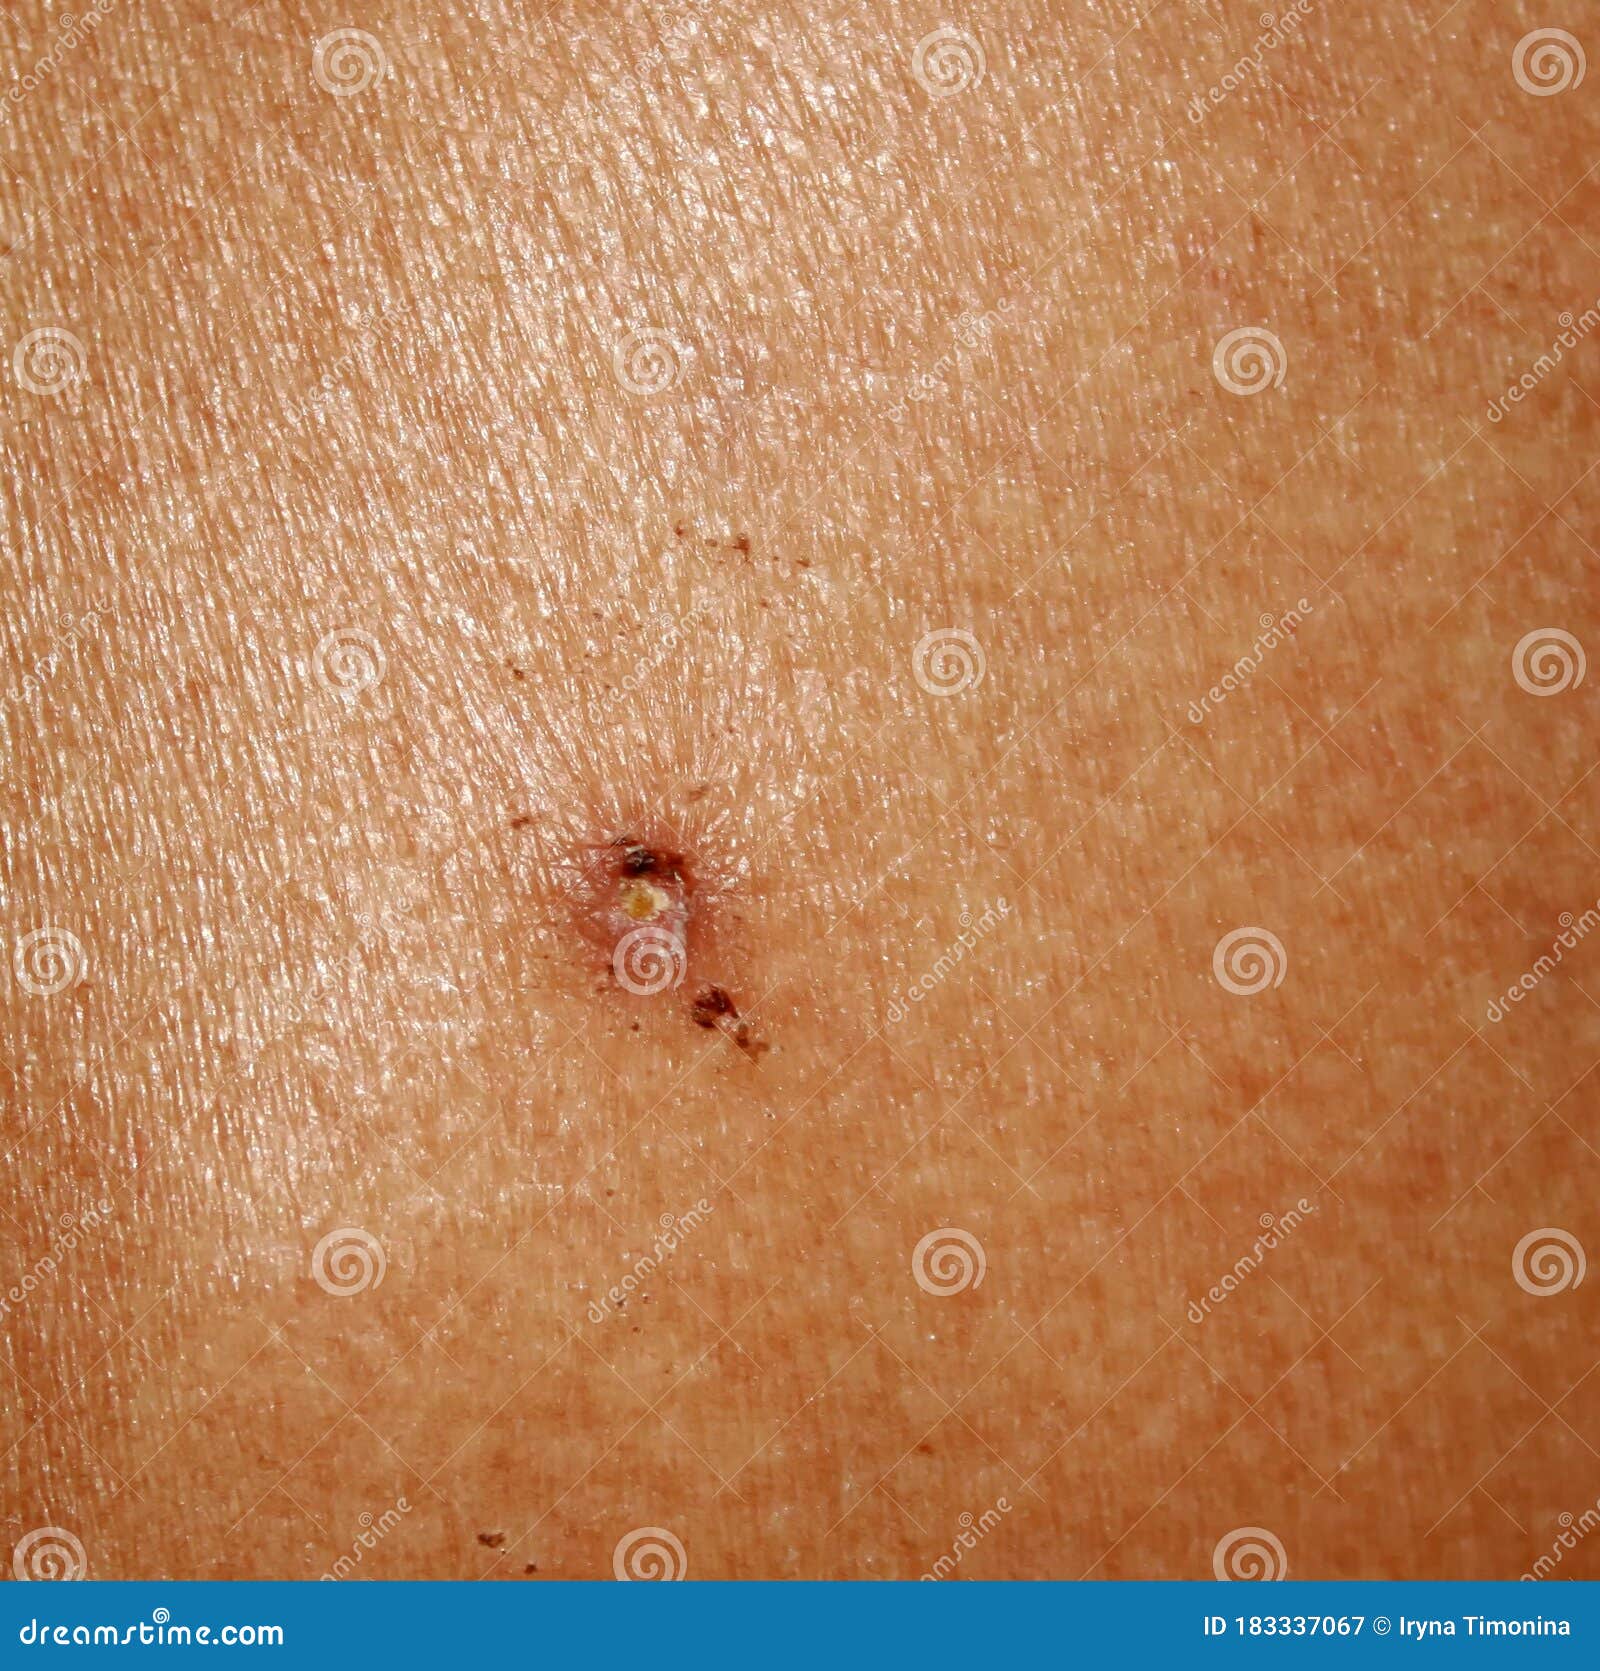 Hpv skin issues